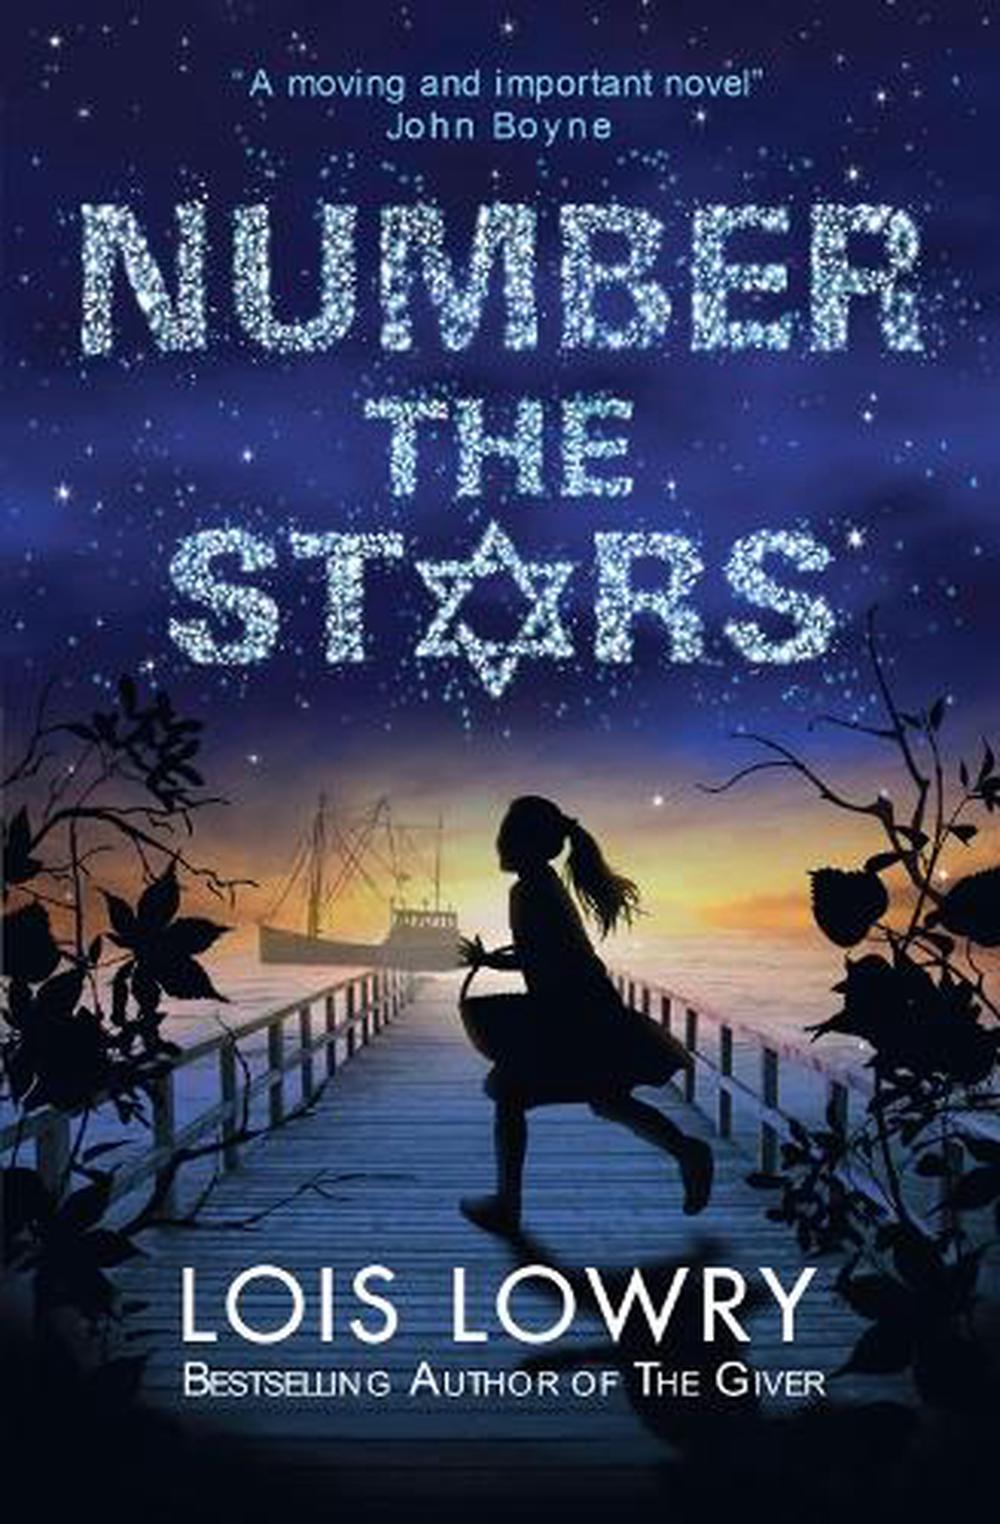 lois lowry books number the stars